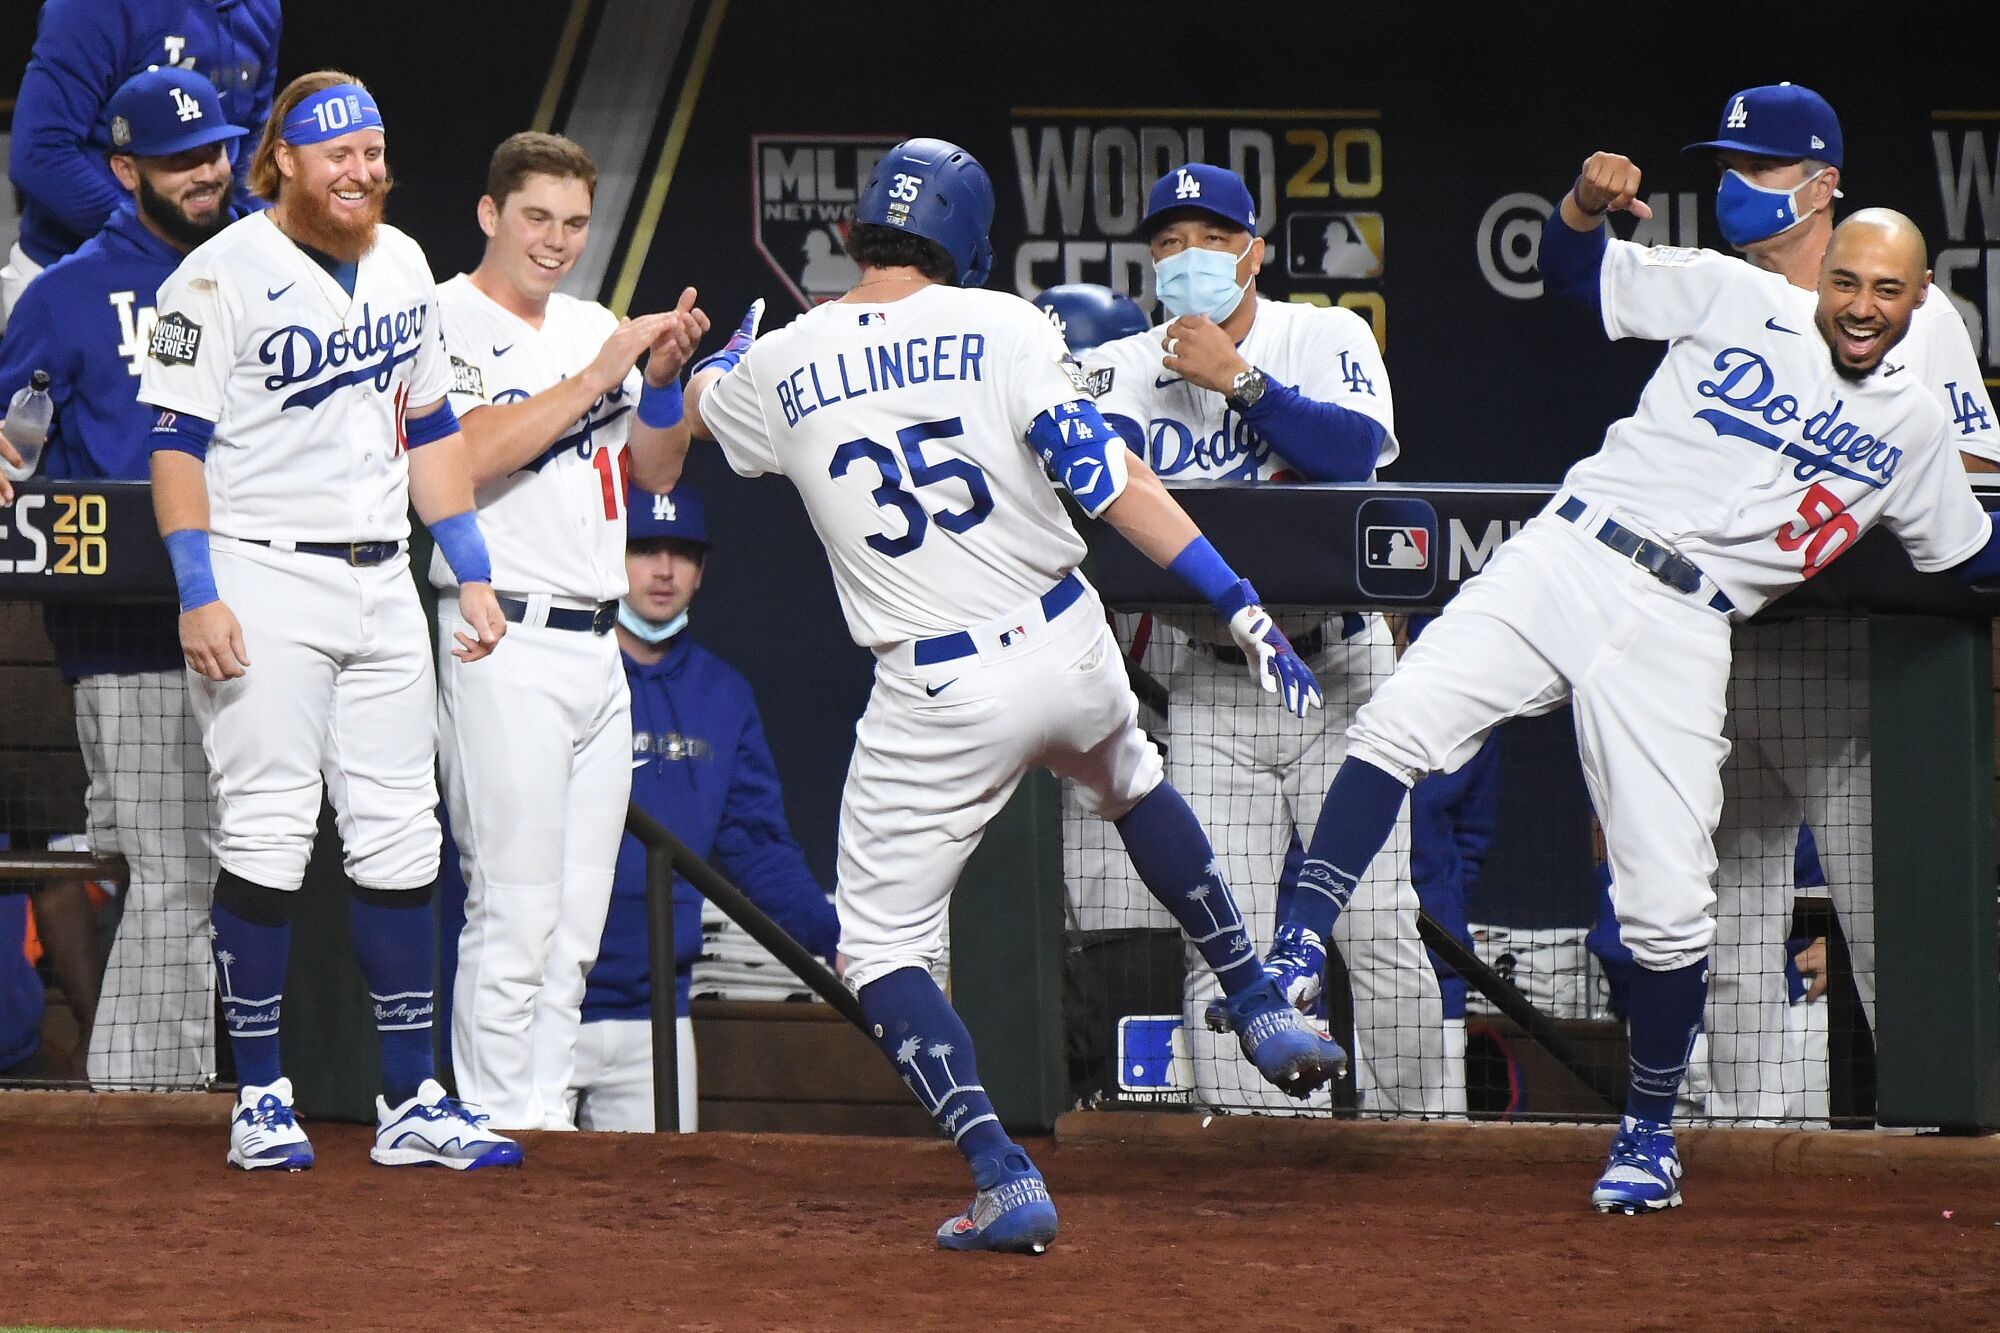 Cody Bellinger celebrates with his teammates after hitting a two-run home run.